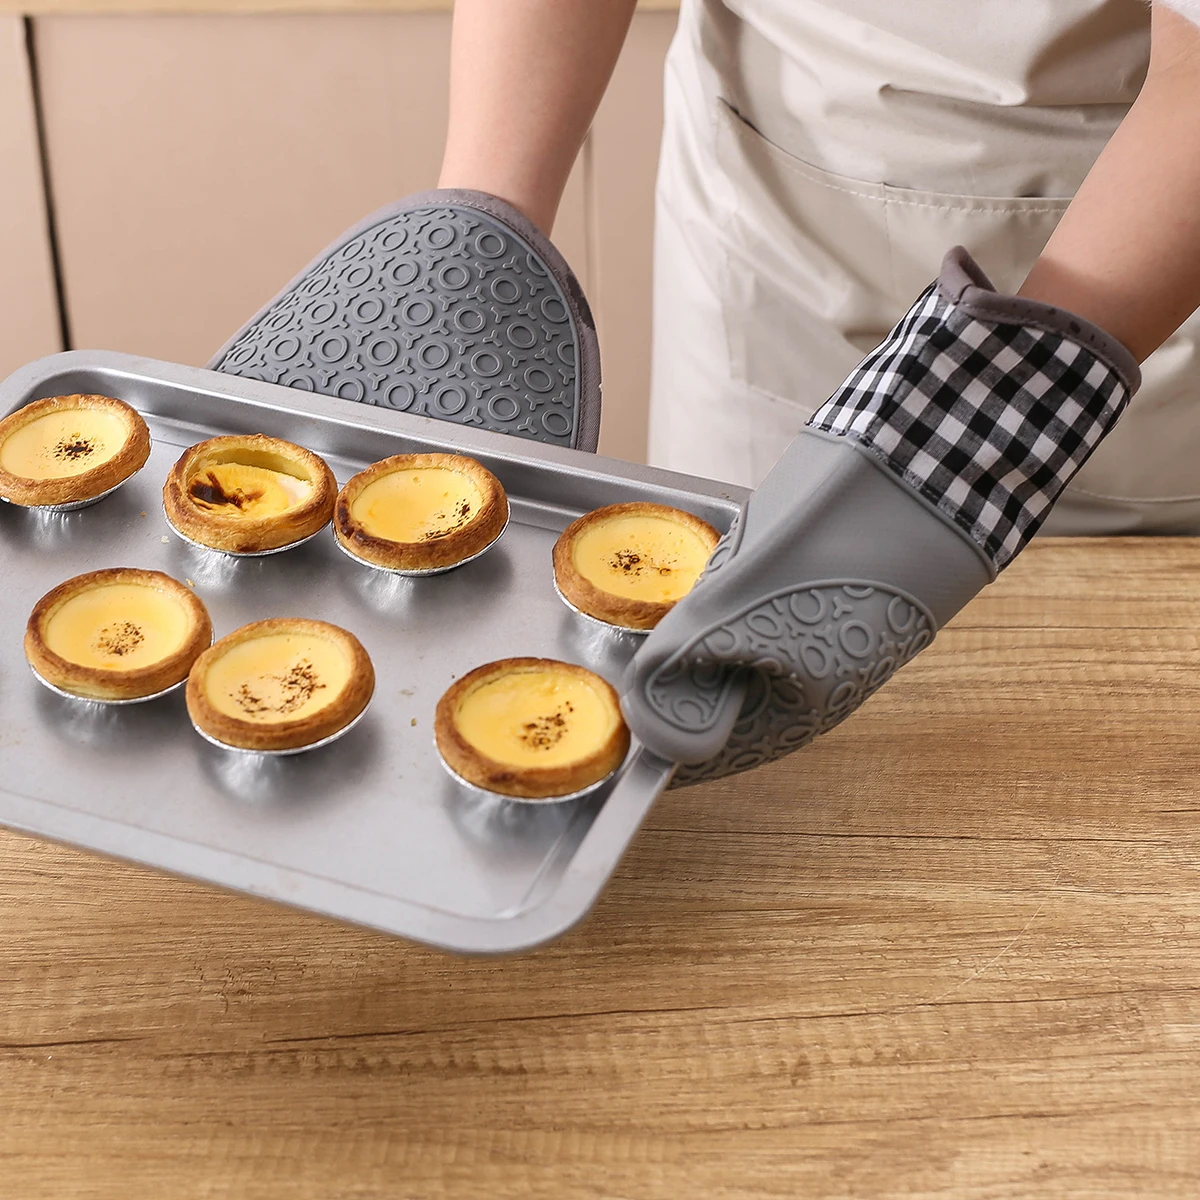 https://ae01.alicdn.com/kf/S8019d91cf135479784d8af25cb81827fa/Oven-Mitts-and-Pot-Holders-4pcs-Set-Kitchen-Oven-Glove-High-Heat-Resistant-500-Degree-Extra.jpg